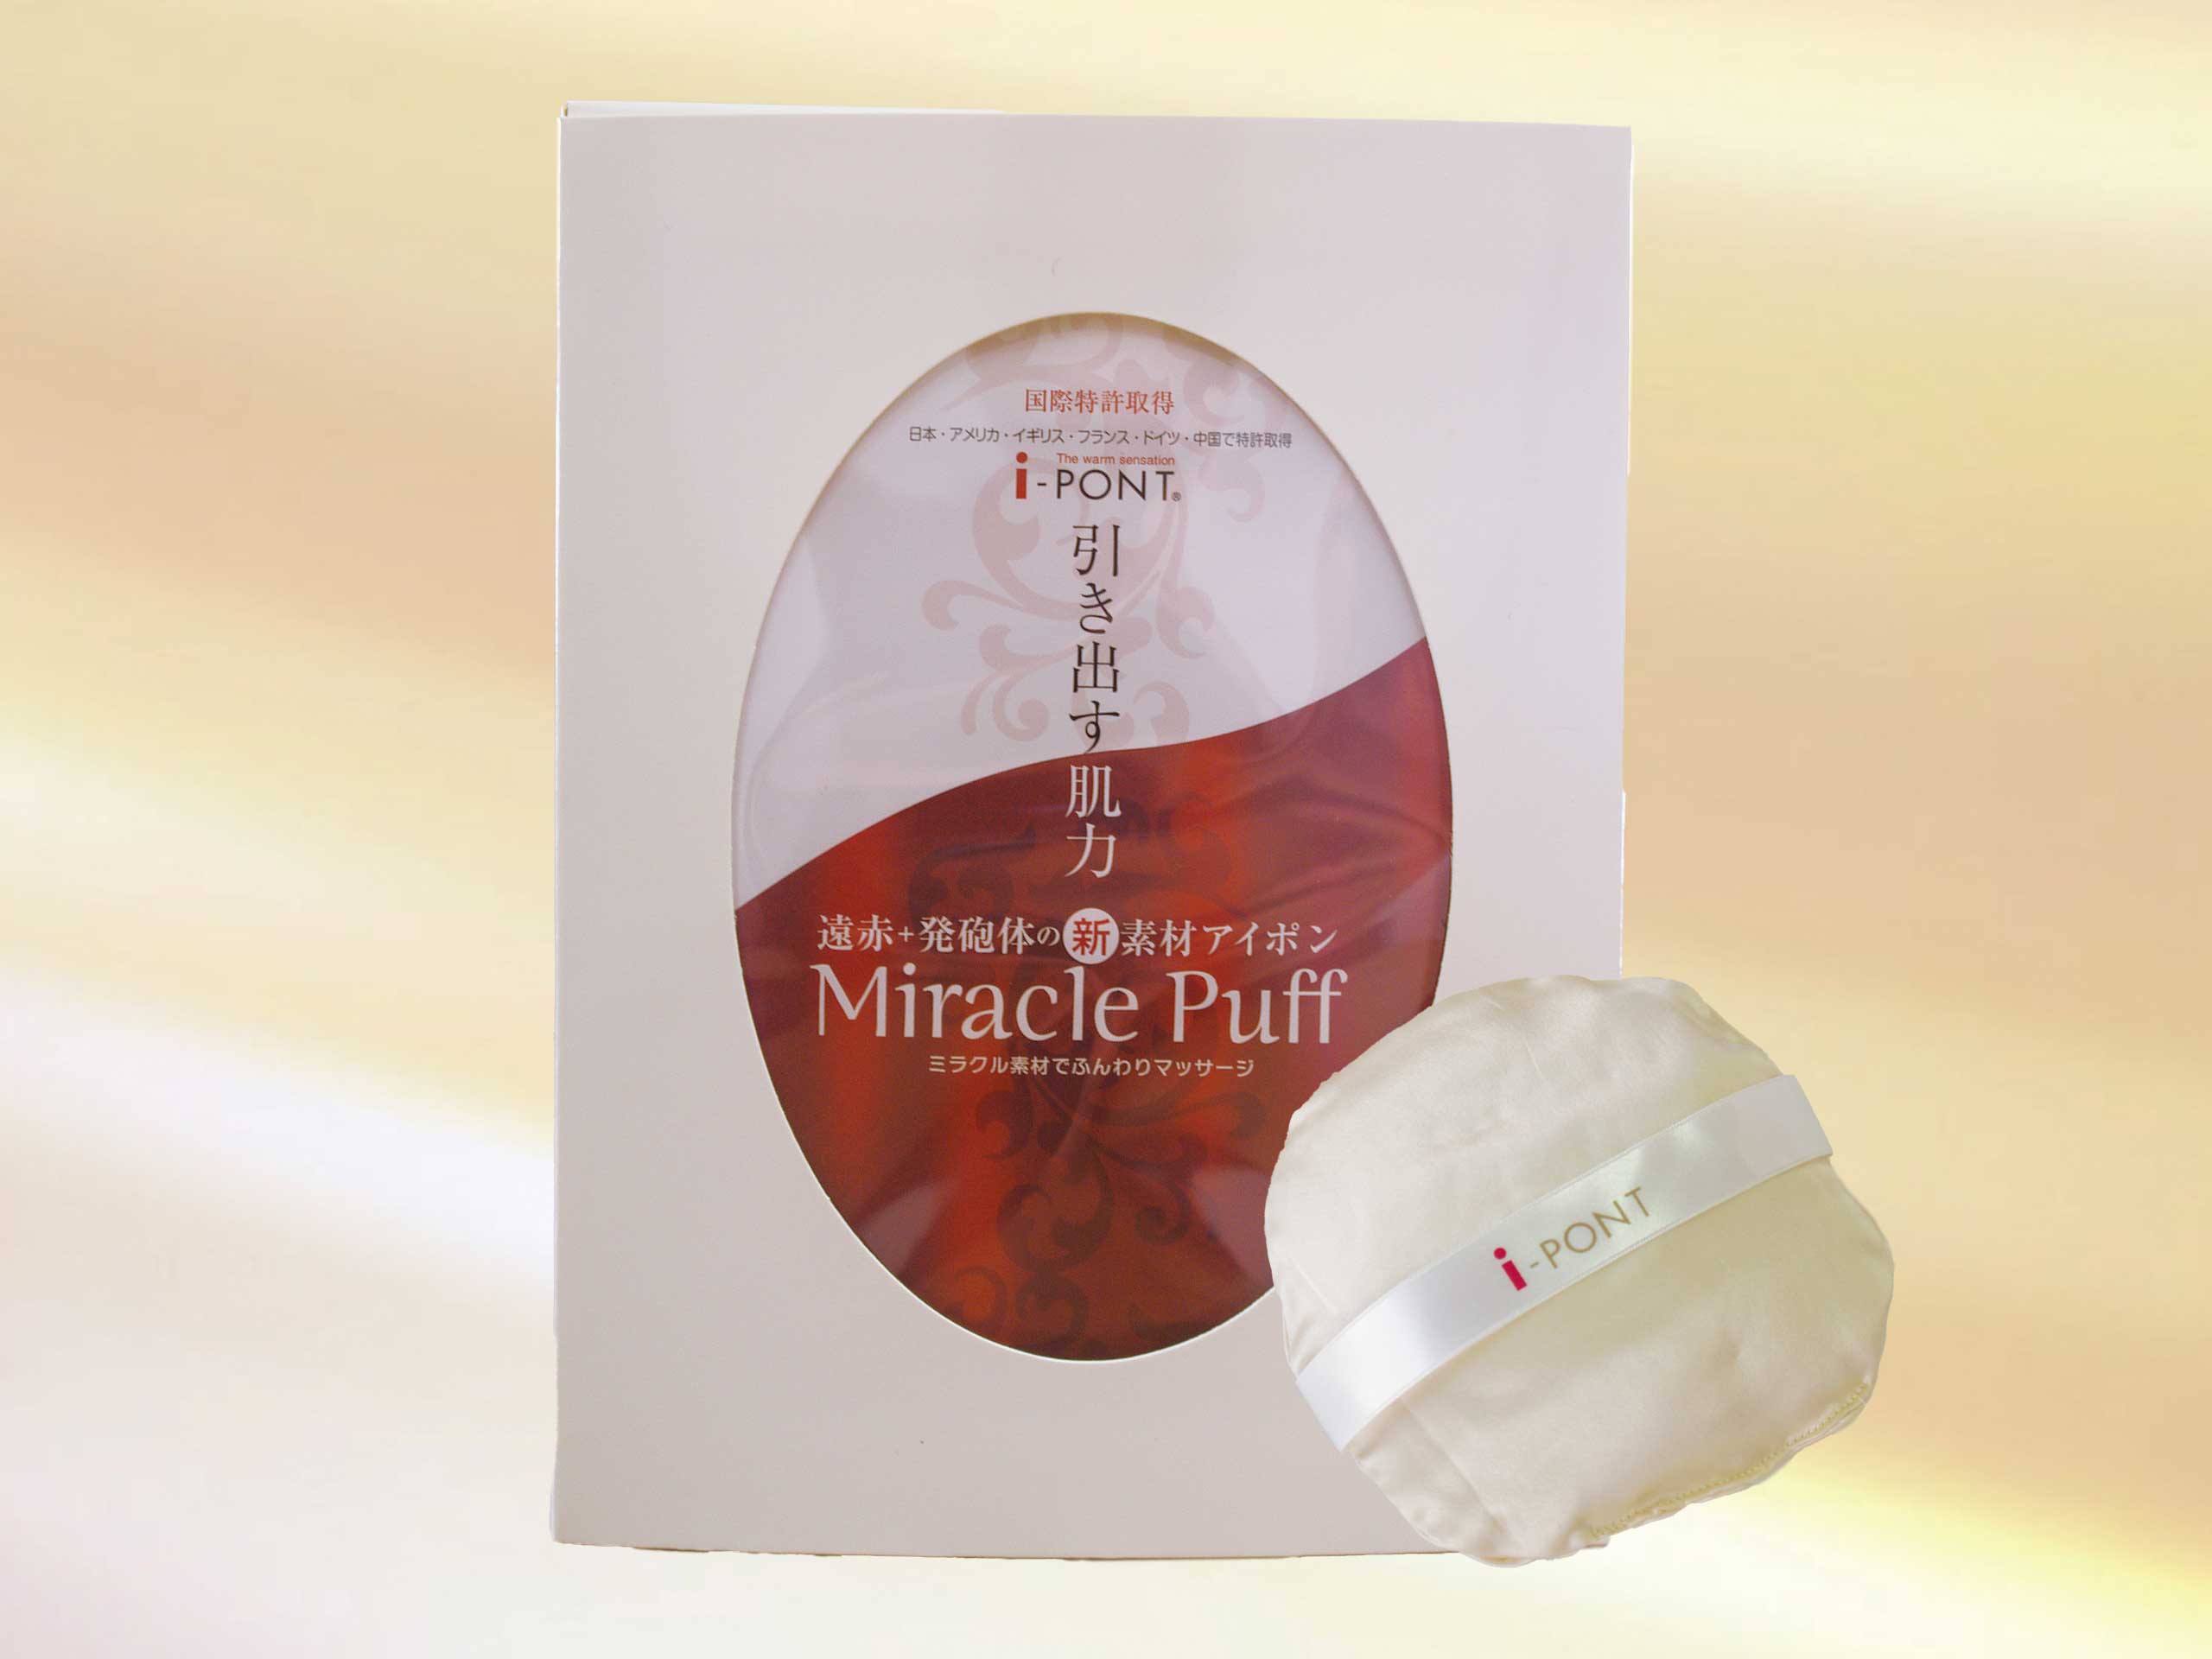 Miracle Puff